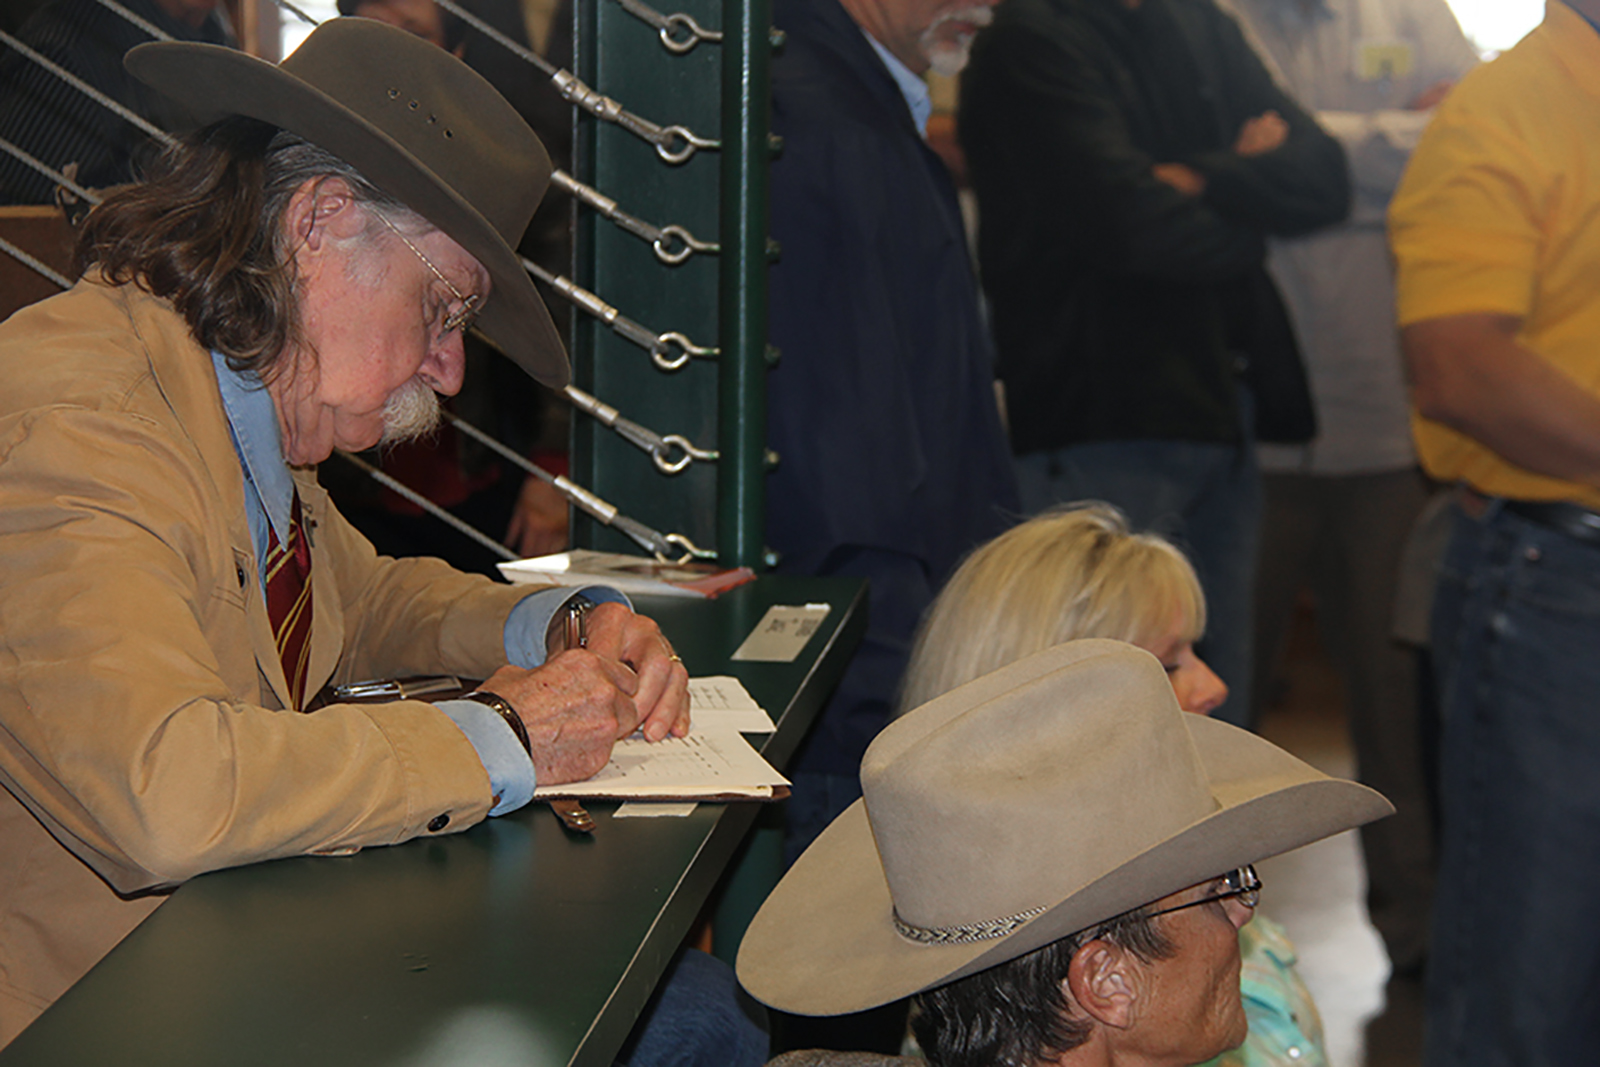 Colonel Littleton sitting at a narrow table, filling out a judging sheet for the auctioneering contest.